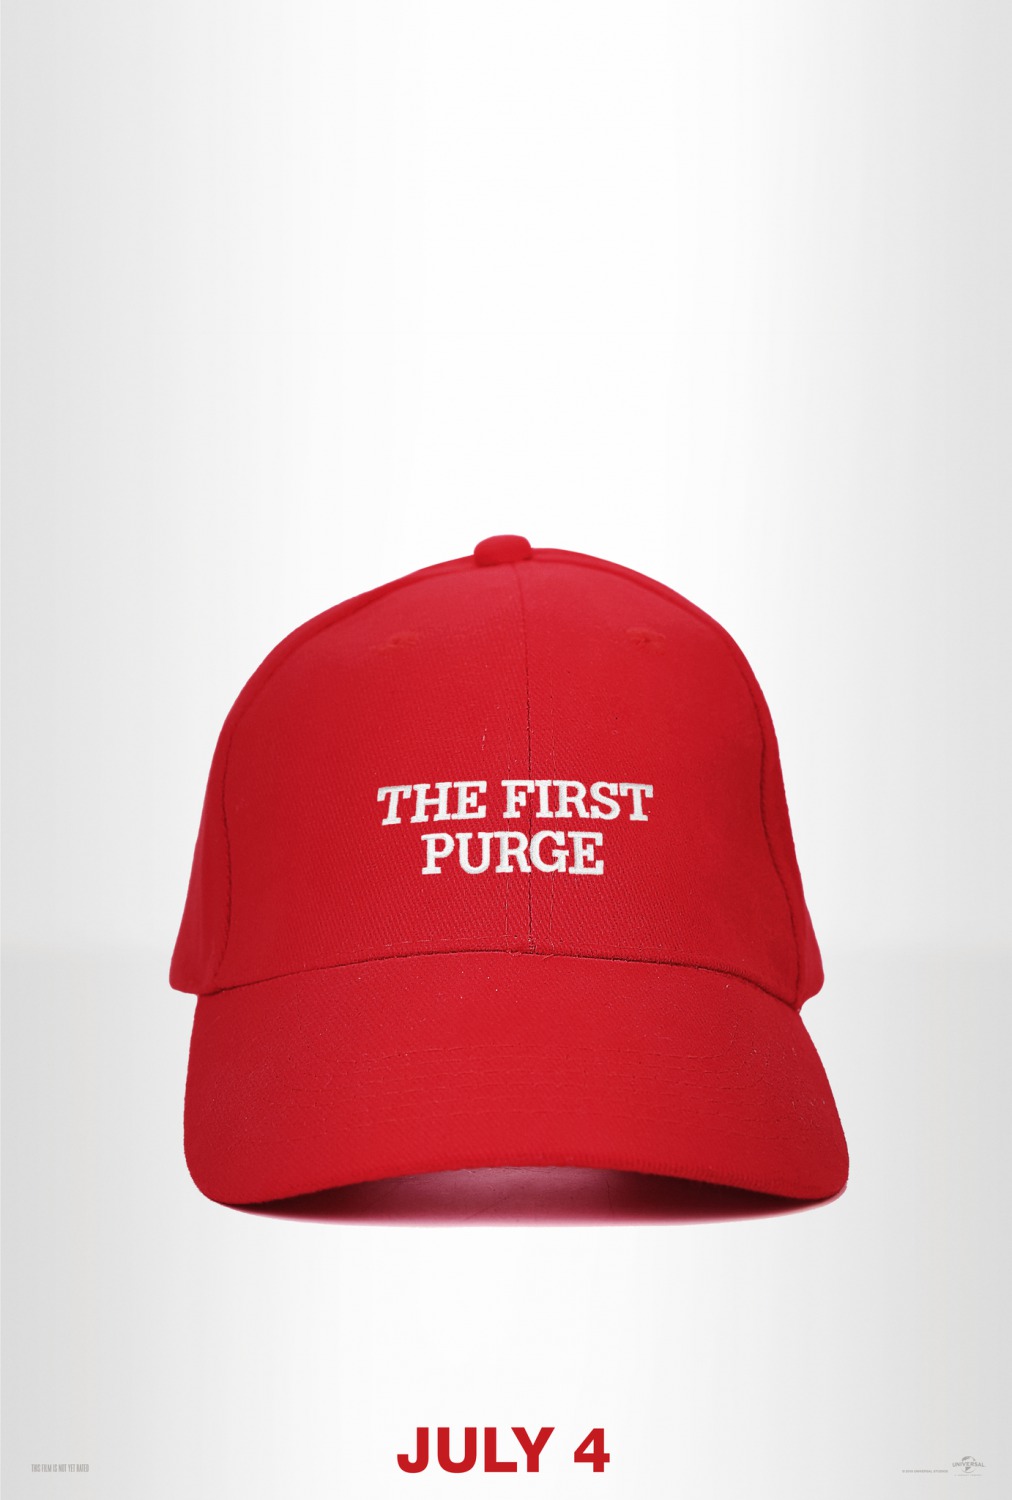 Extra Large Movie Poster Image for The First Purge (#1 of 12)